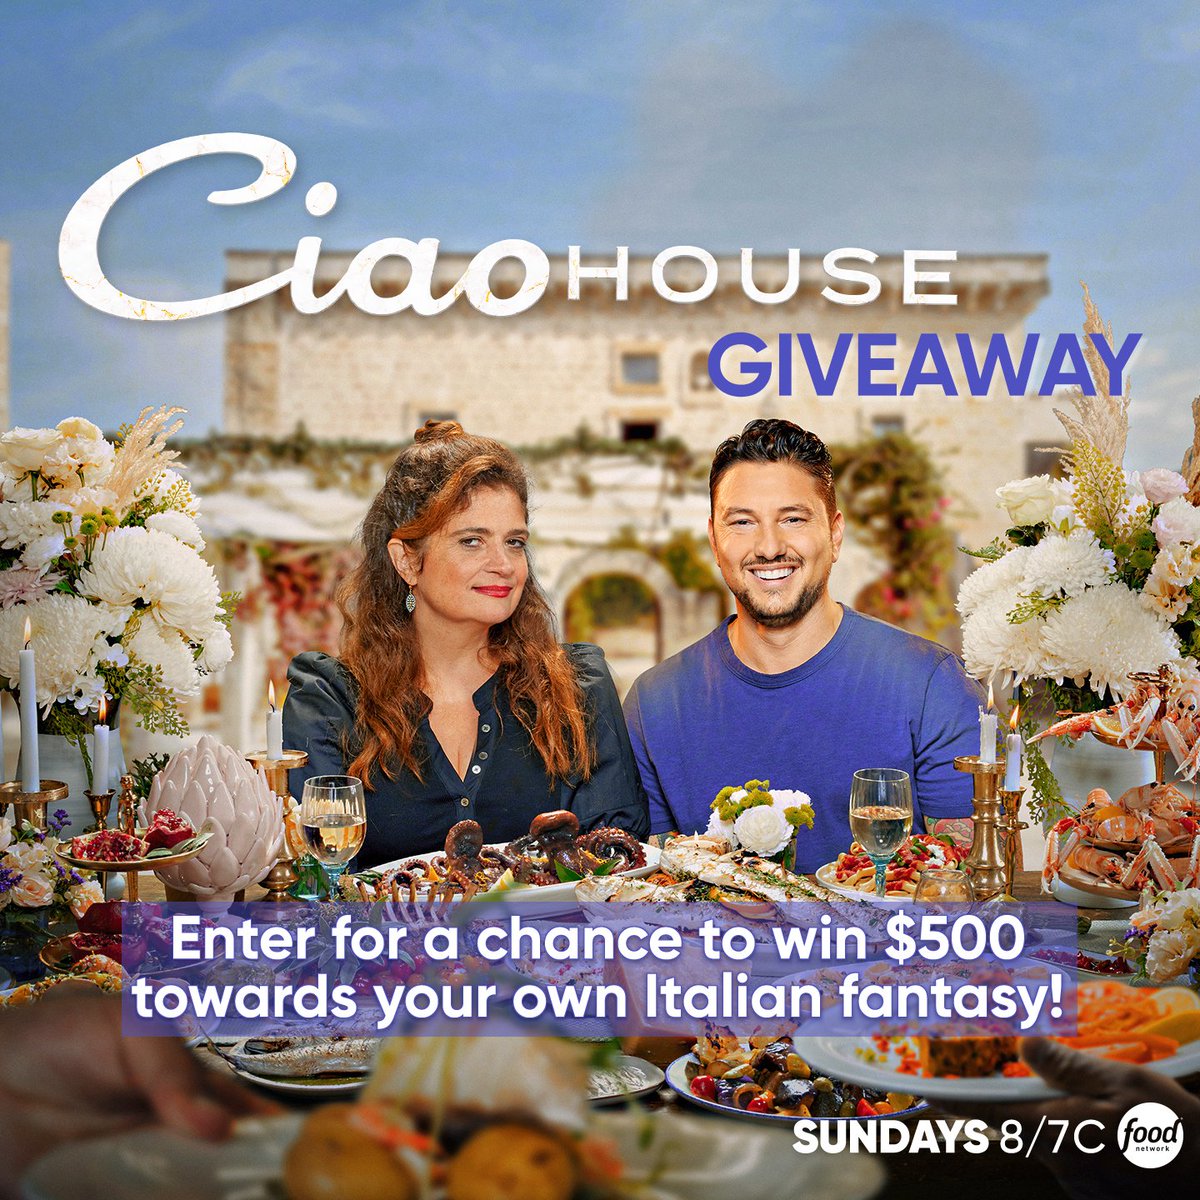 GIVEAWAY! 💰 Comment below and tell us who YOU think will take the title this year on #CiaoHouse based on your first impressions. We’ll randomly pick 4 winners who will receive $500 towards their own Italian fantasy – whether that's a meal at your favorite local Italian eatery,